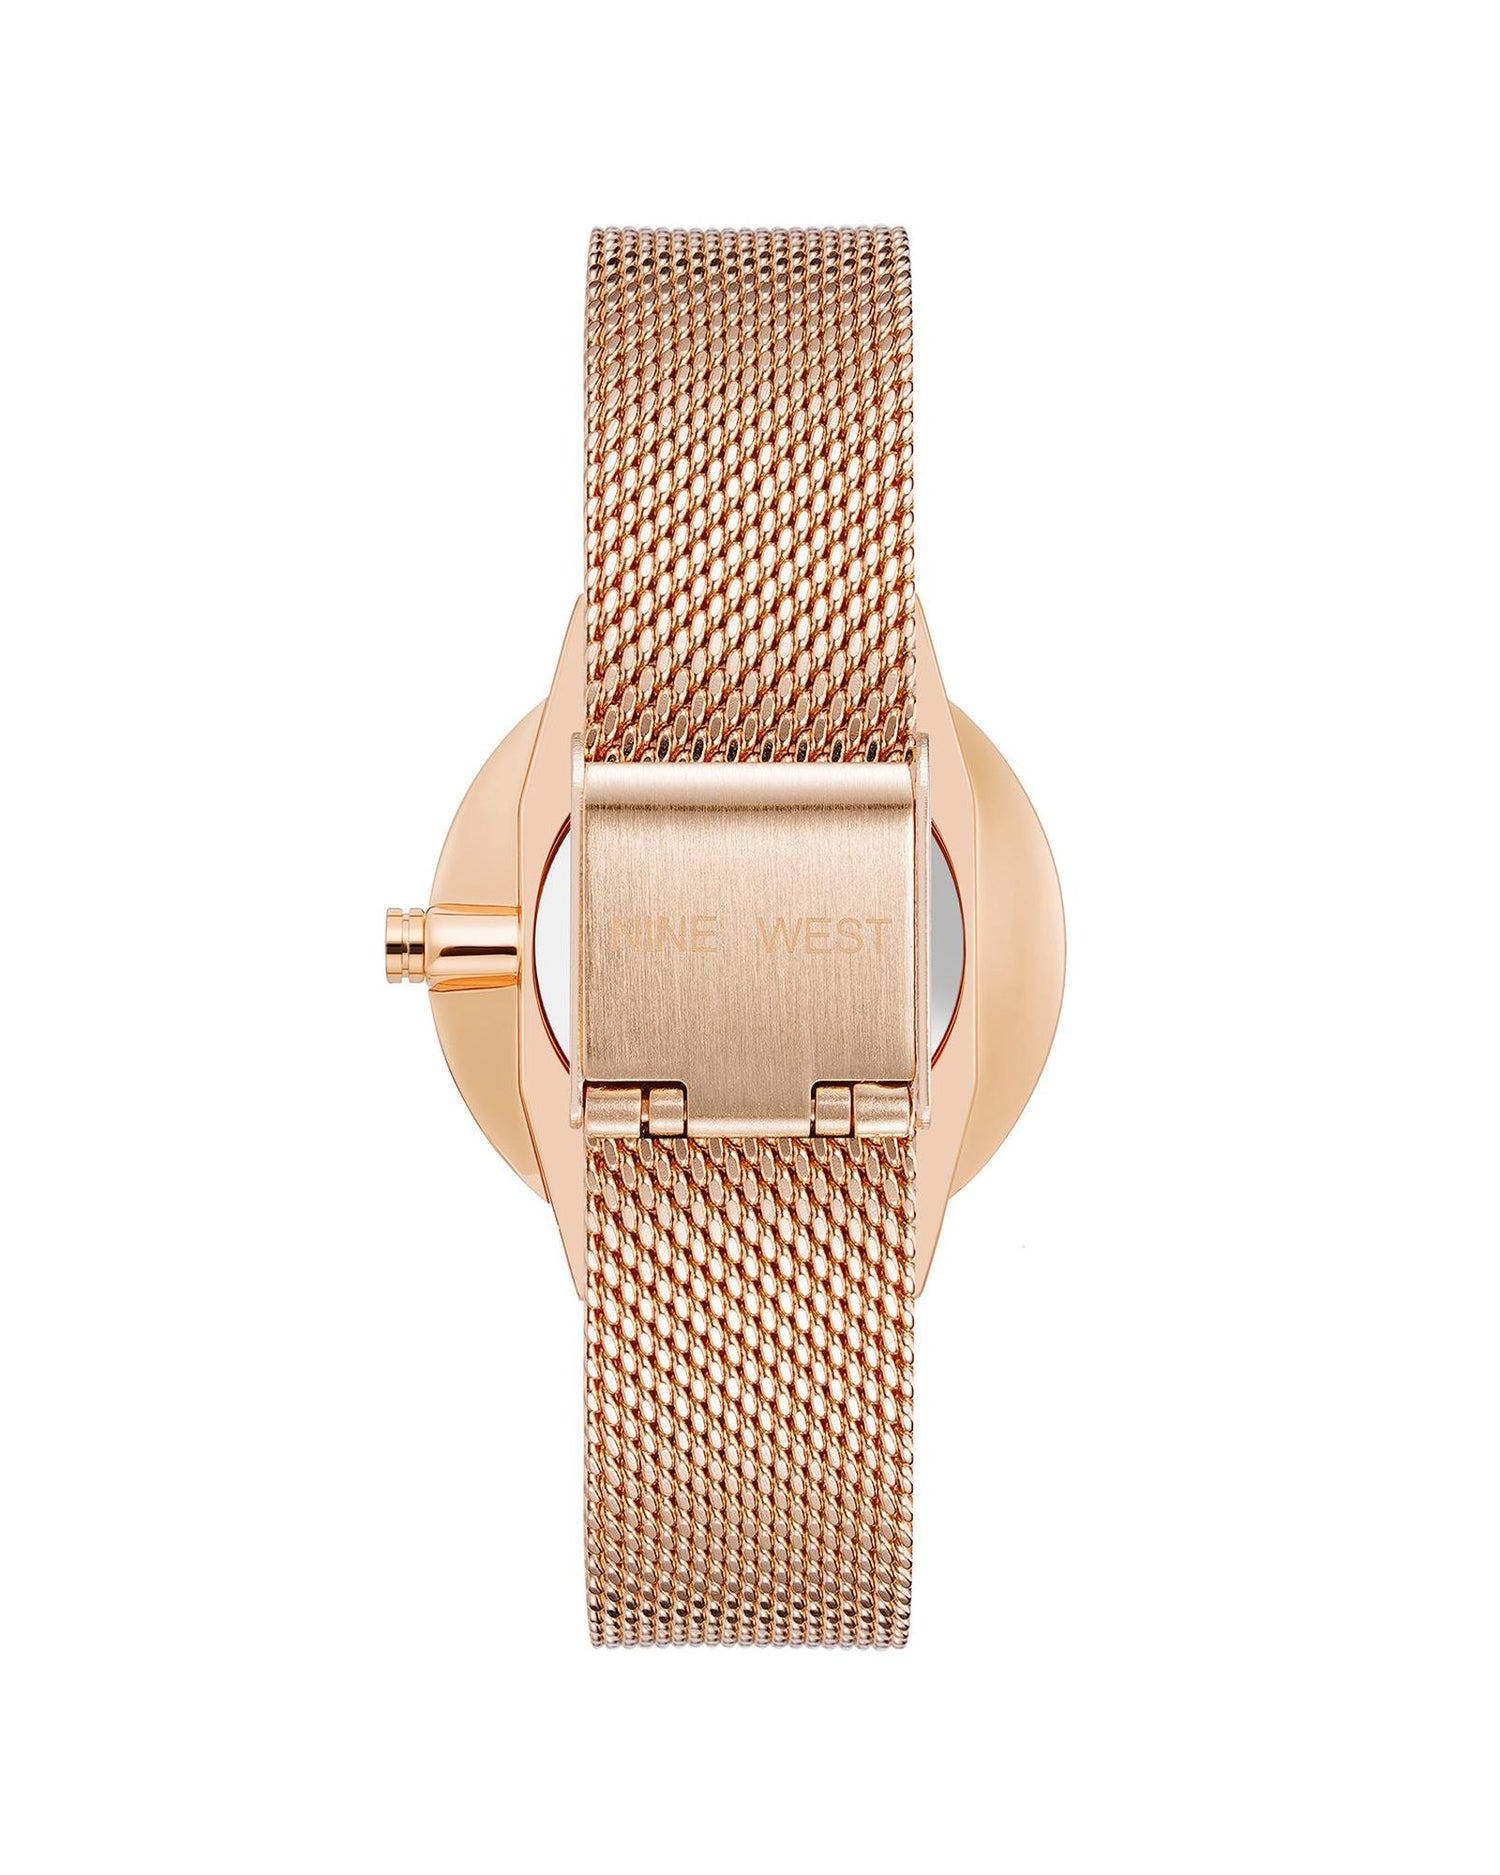 Rose Gold Stainless Steel Mesh Bangle Watch One Size Women-Women&